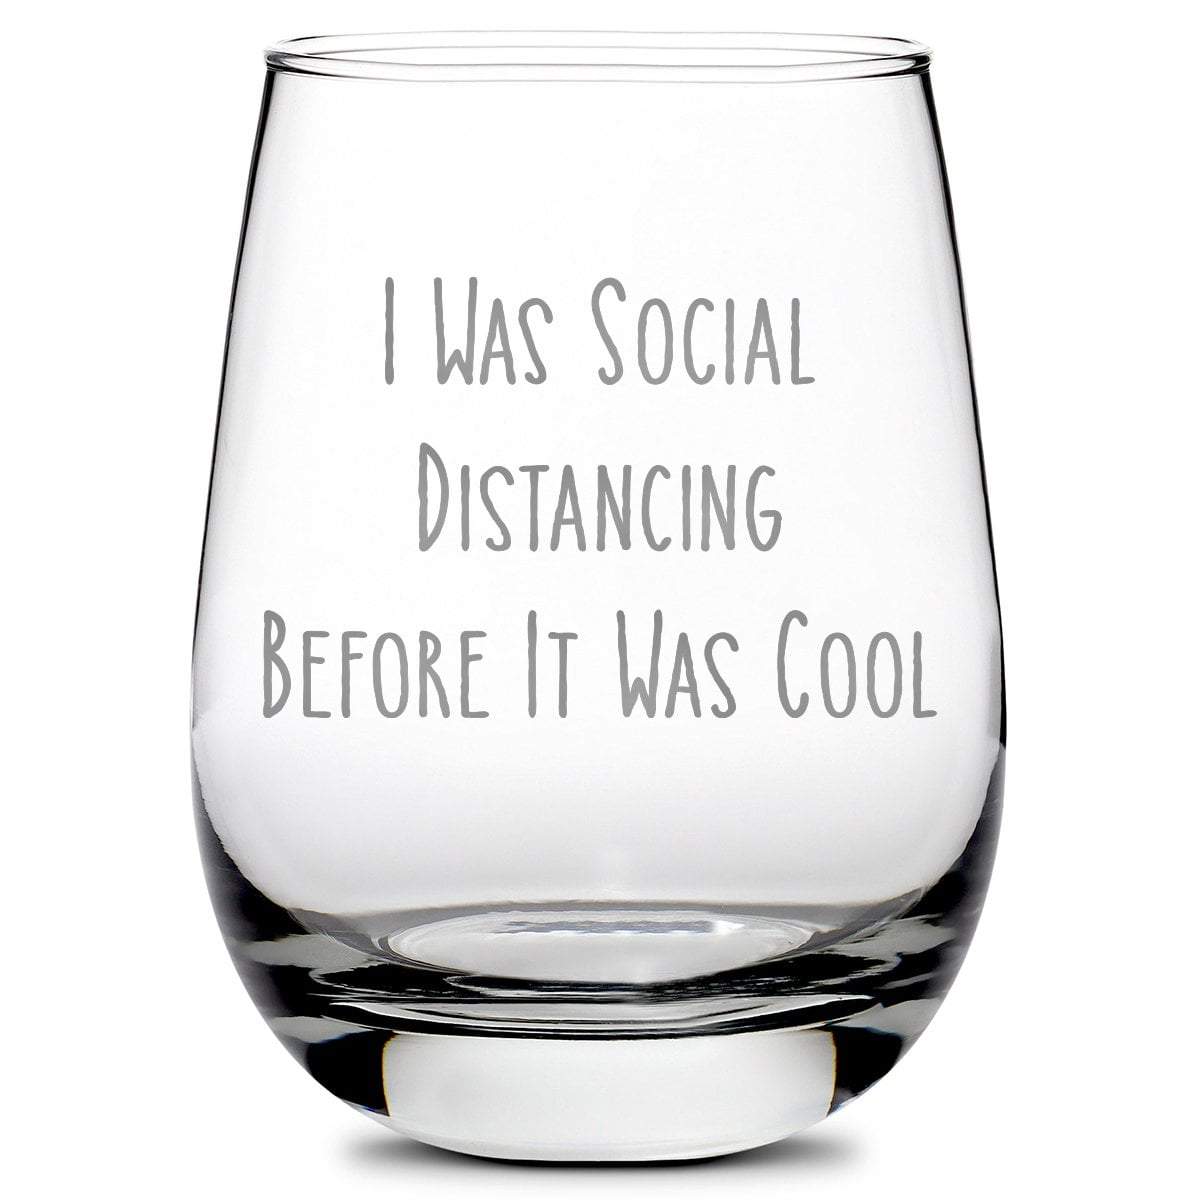 Premium Coronavirus Wine Glass - Hand-Etched Social Distancing Drinking Glasses,  Made in USA, 11oz, Laser Etched or Hand Etched